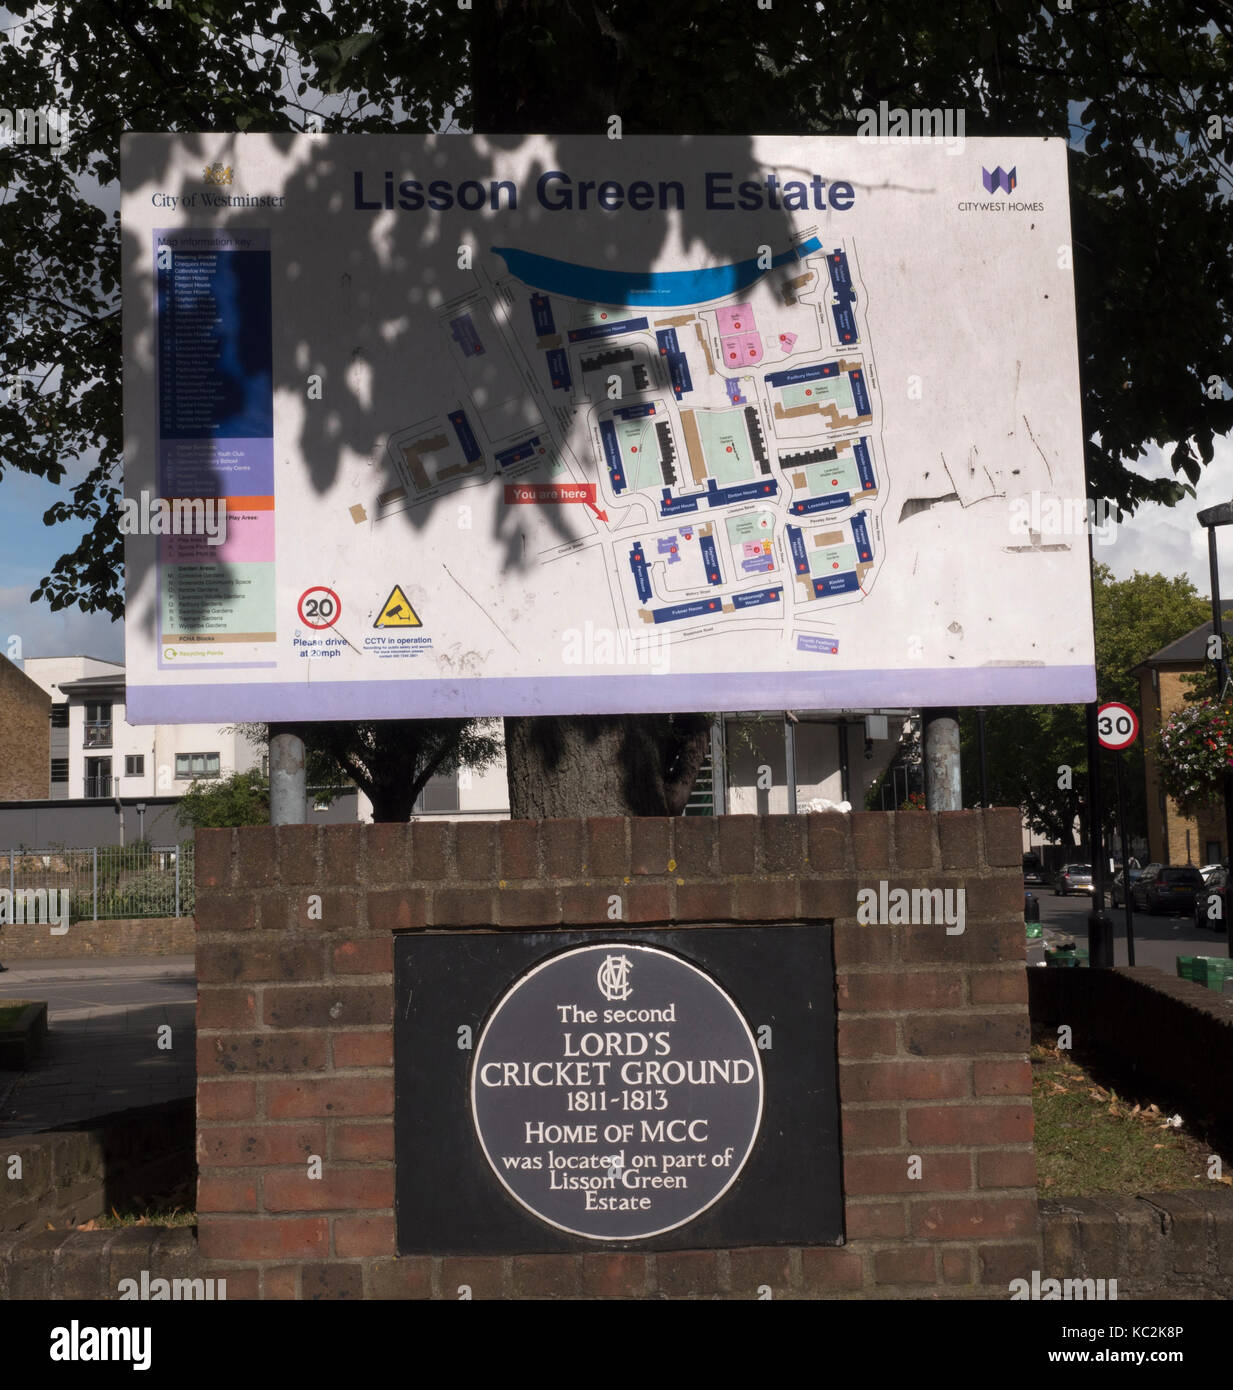 Map and heritage plaque ( The Second Lord's Cricket Ground 1811 -1813) at entrance to Lisson Green Estate, Westminster ,London, England, UK Stock Photo